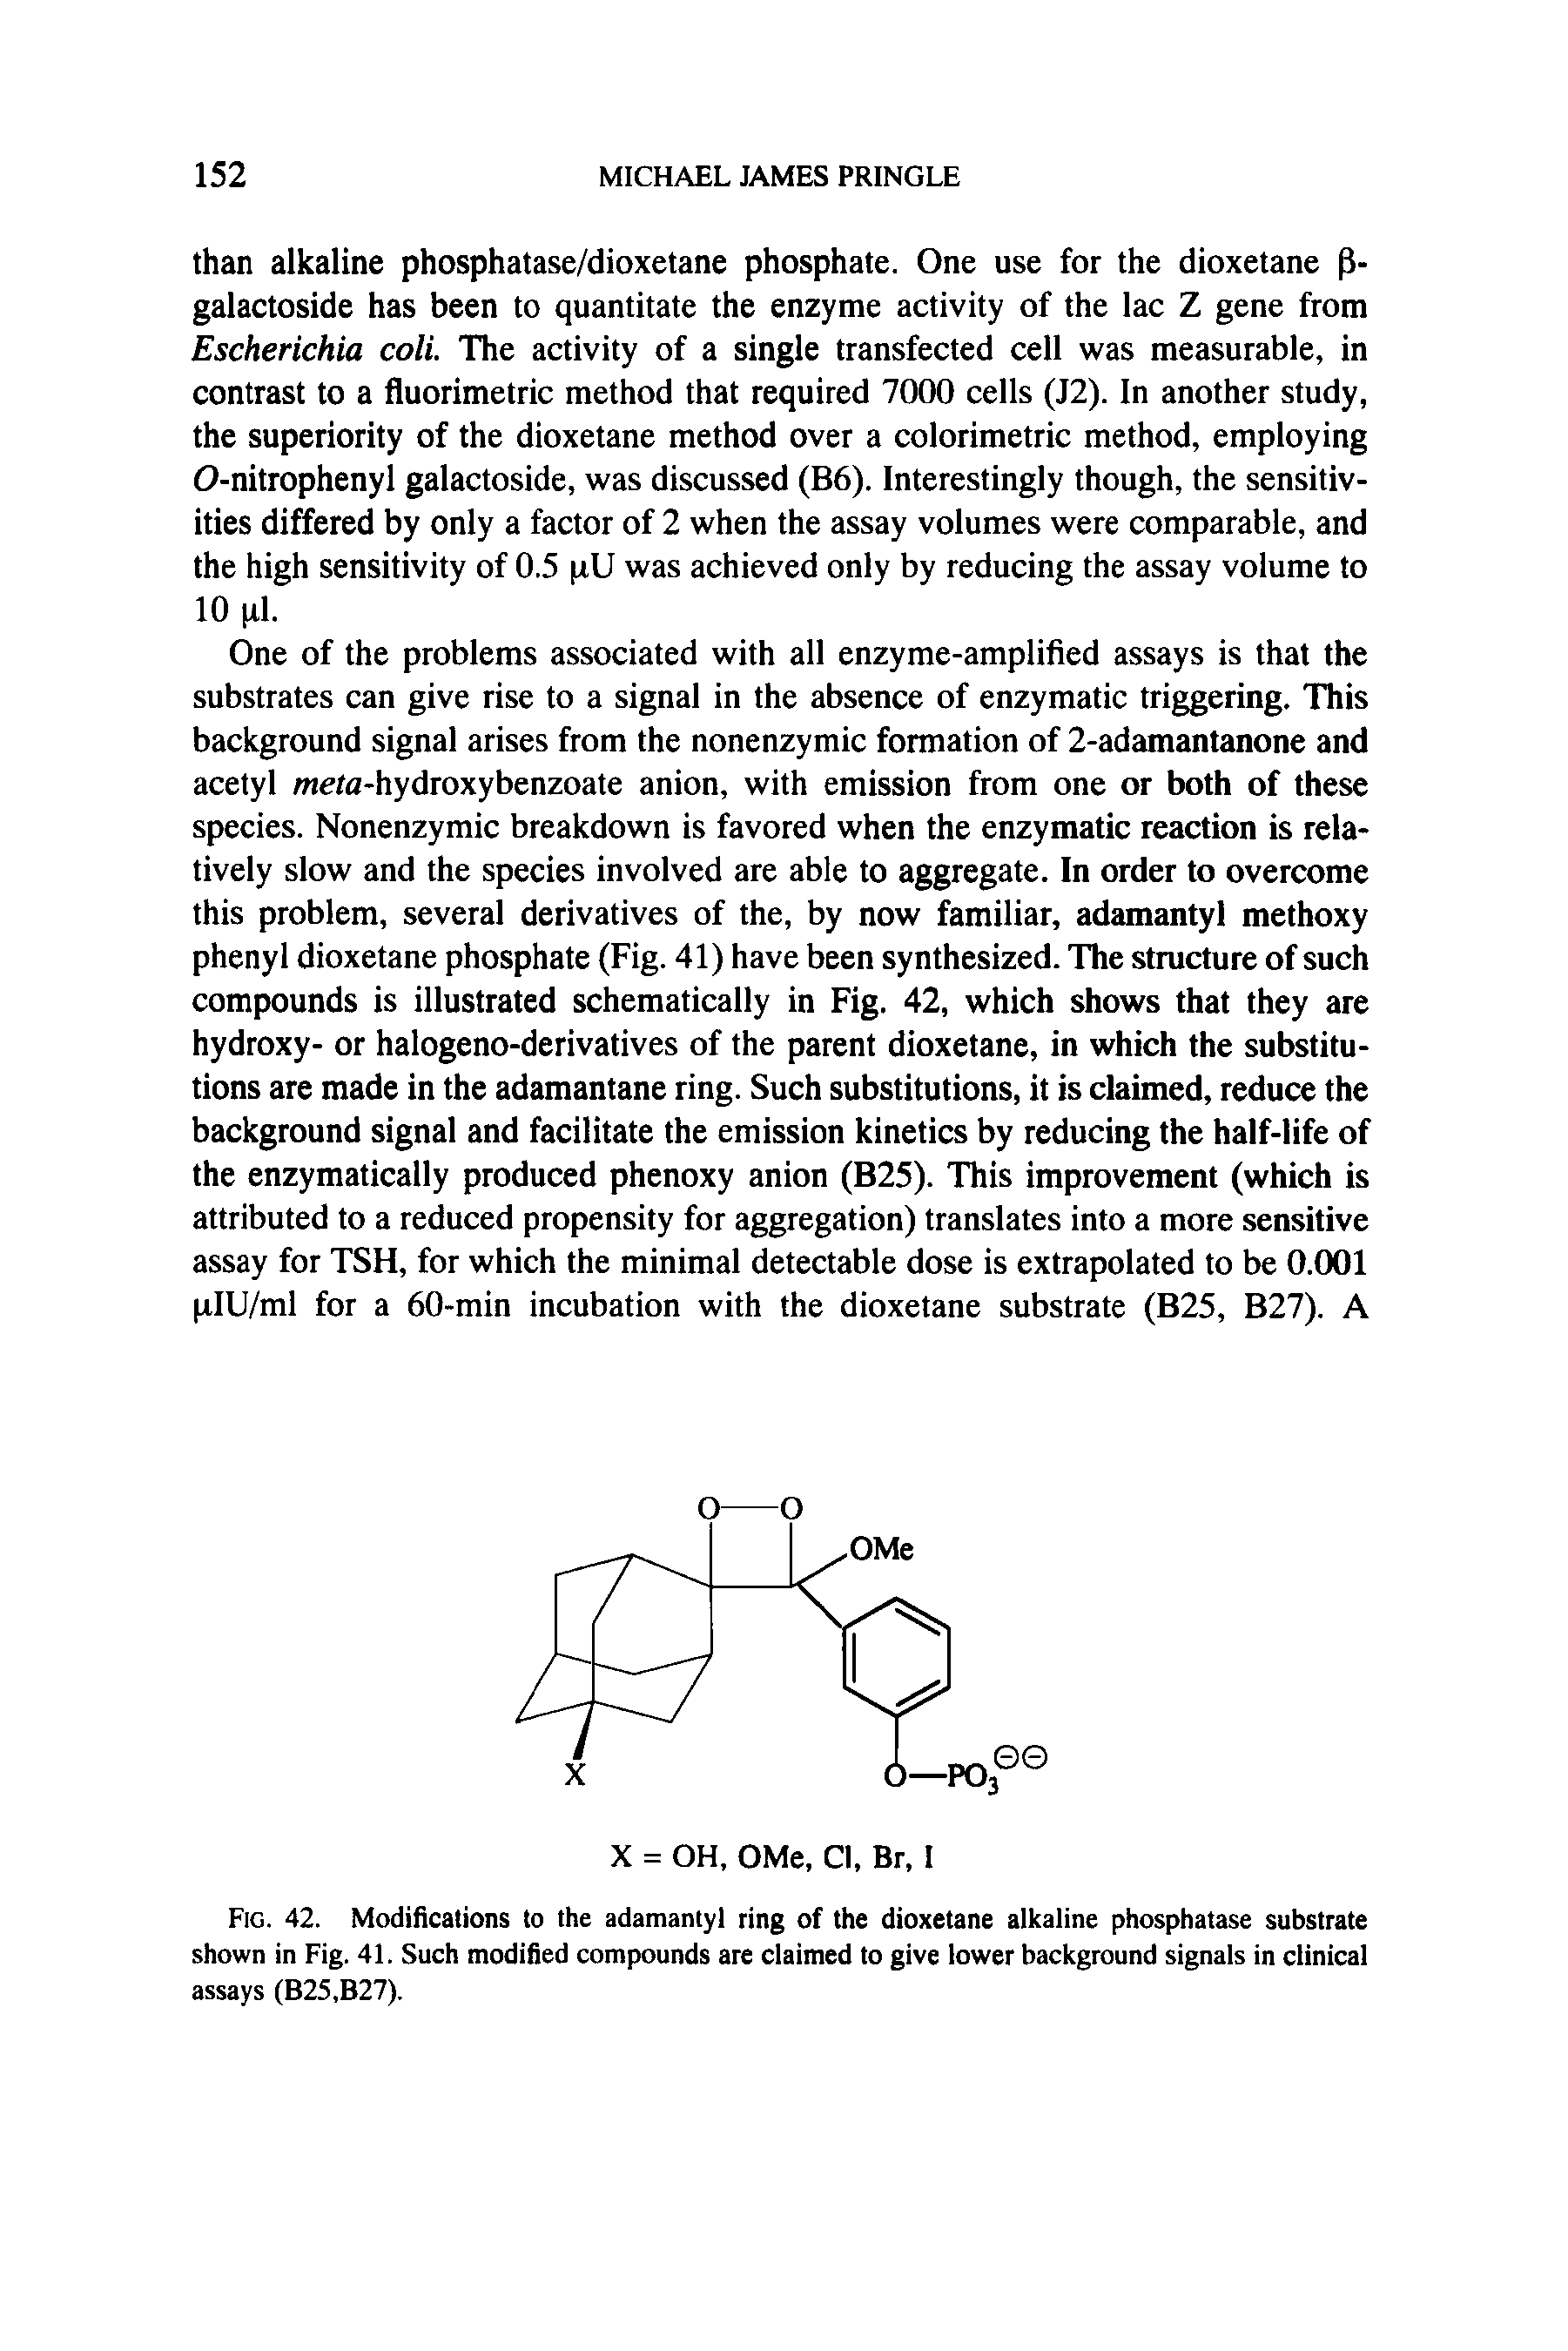 Fig. 42. Modifications to the adamantyl ring of the dioxetane alkaline phosphatase substrate shown in Fig. 41. Such modified compounds are claimed to give lower background signals in clinical assays (B25,B27).